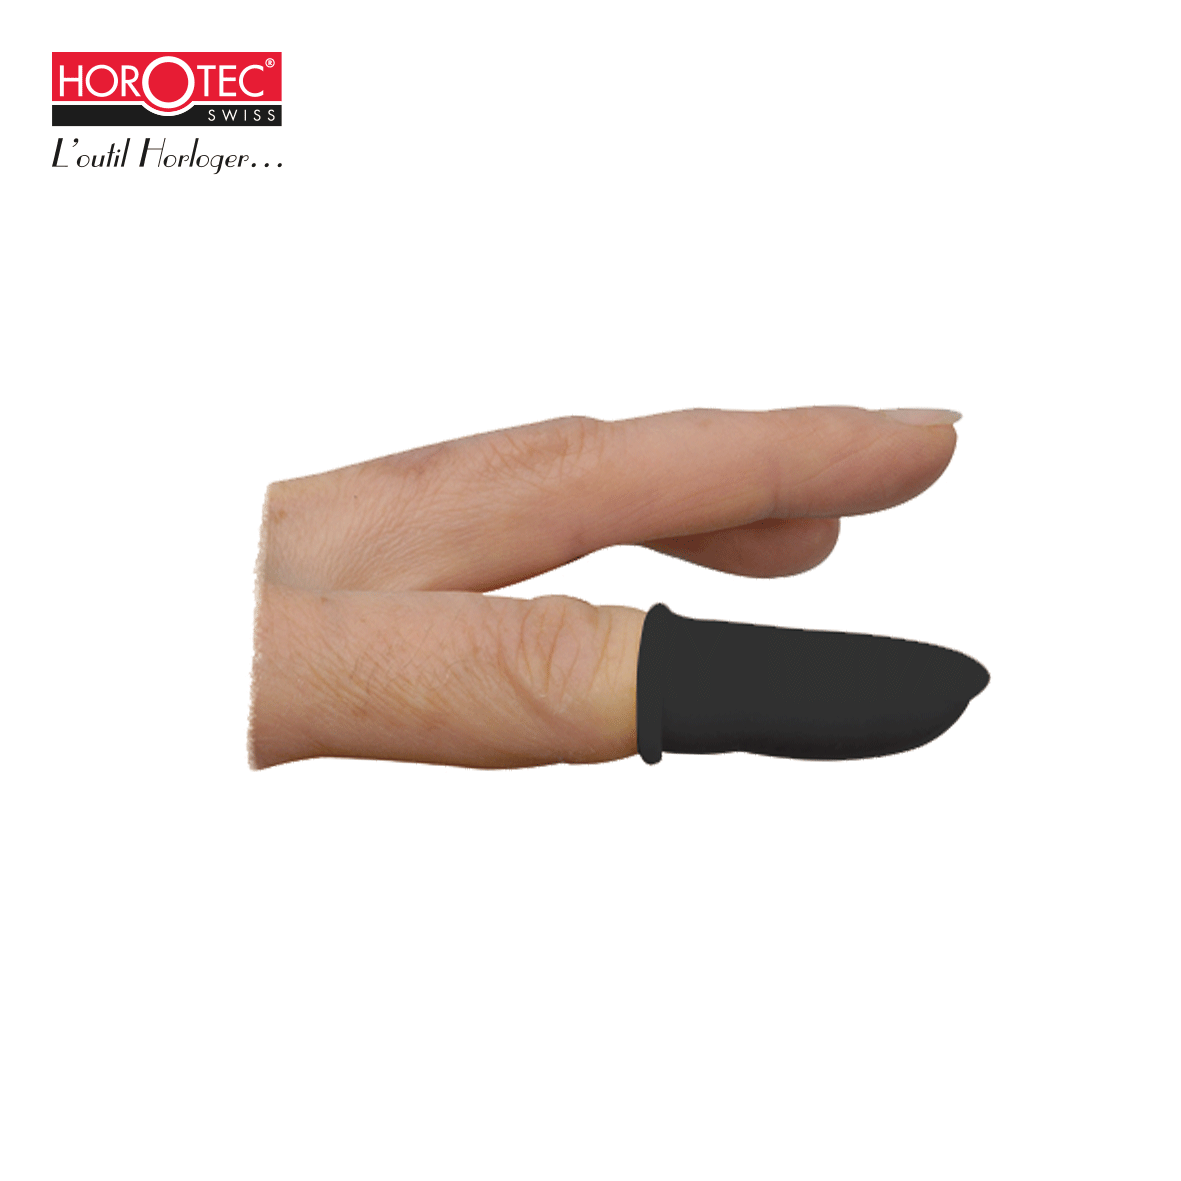 MSA26.268-L HOROTEC® ANTISTATIC (ESD) ROLLED FINGER COT IN 100% NATURAL LATEX, BLACK WITH POWDER / SIZE LARGE / BAG OF 100 PIECES